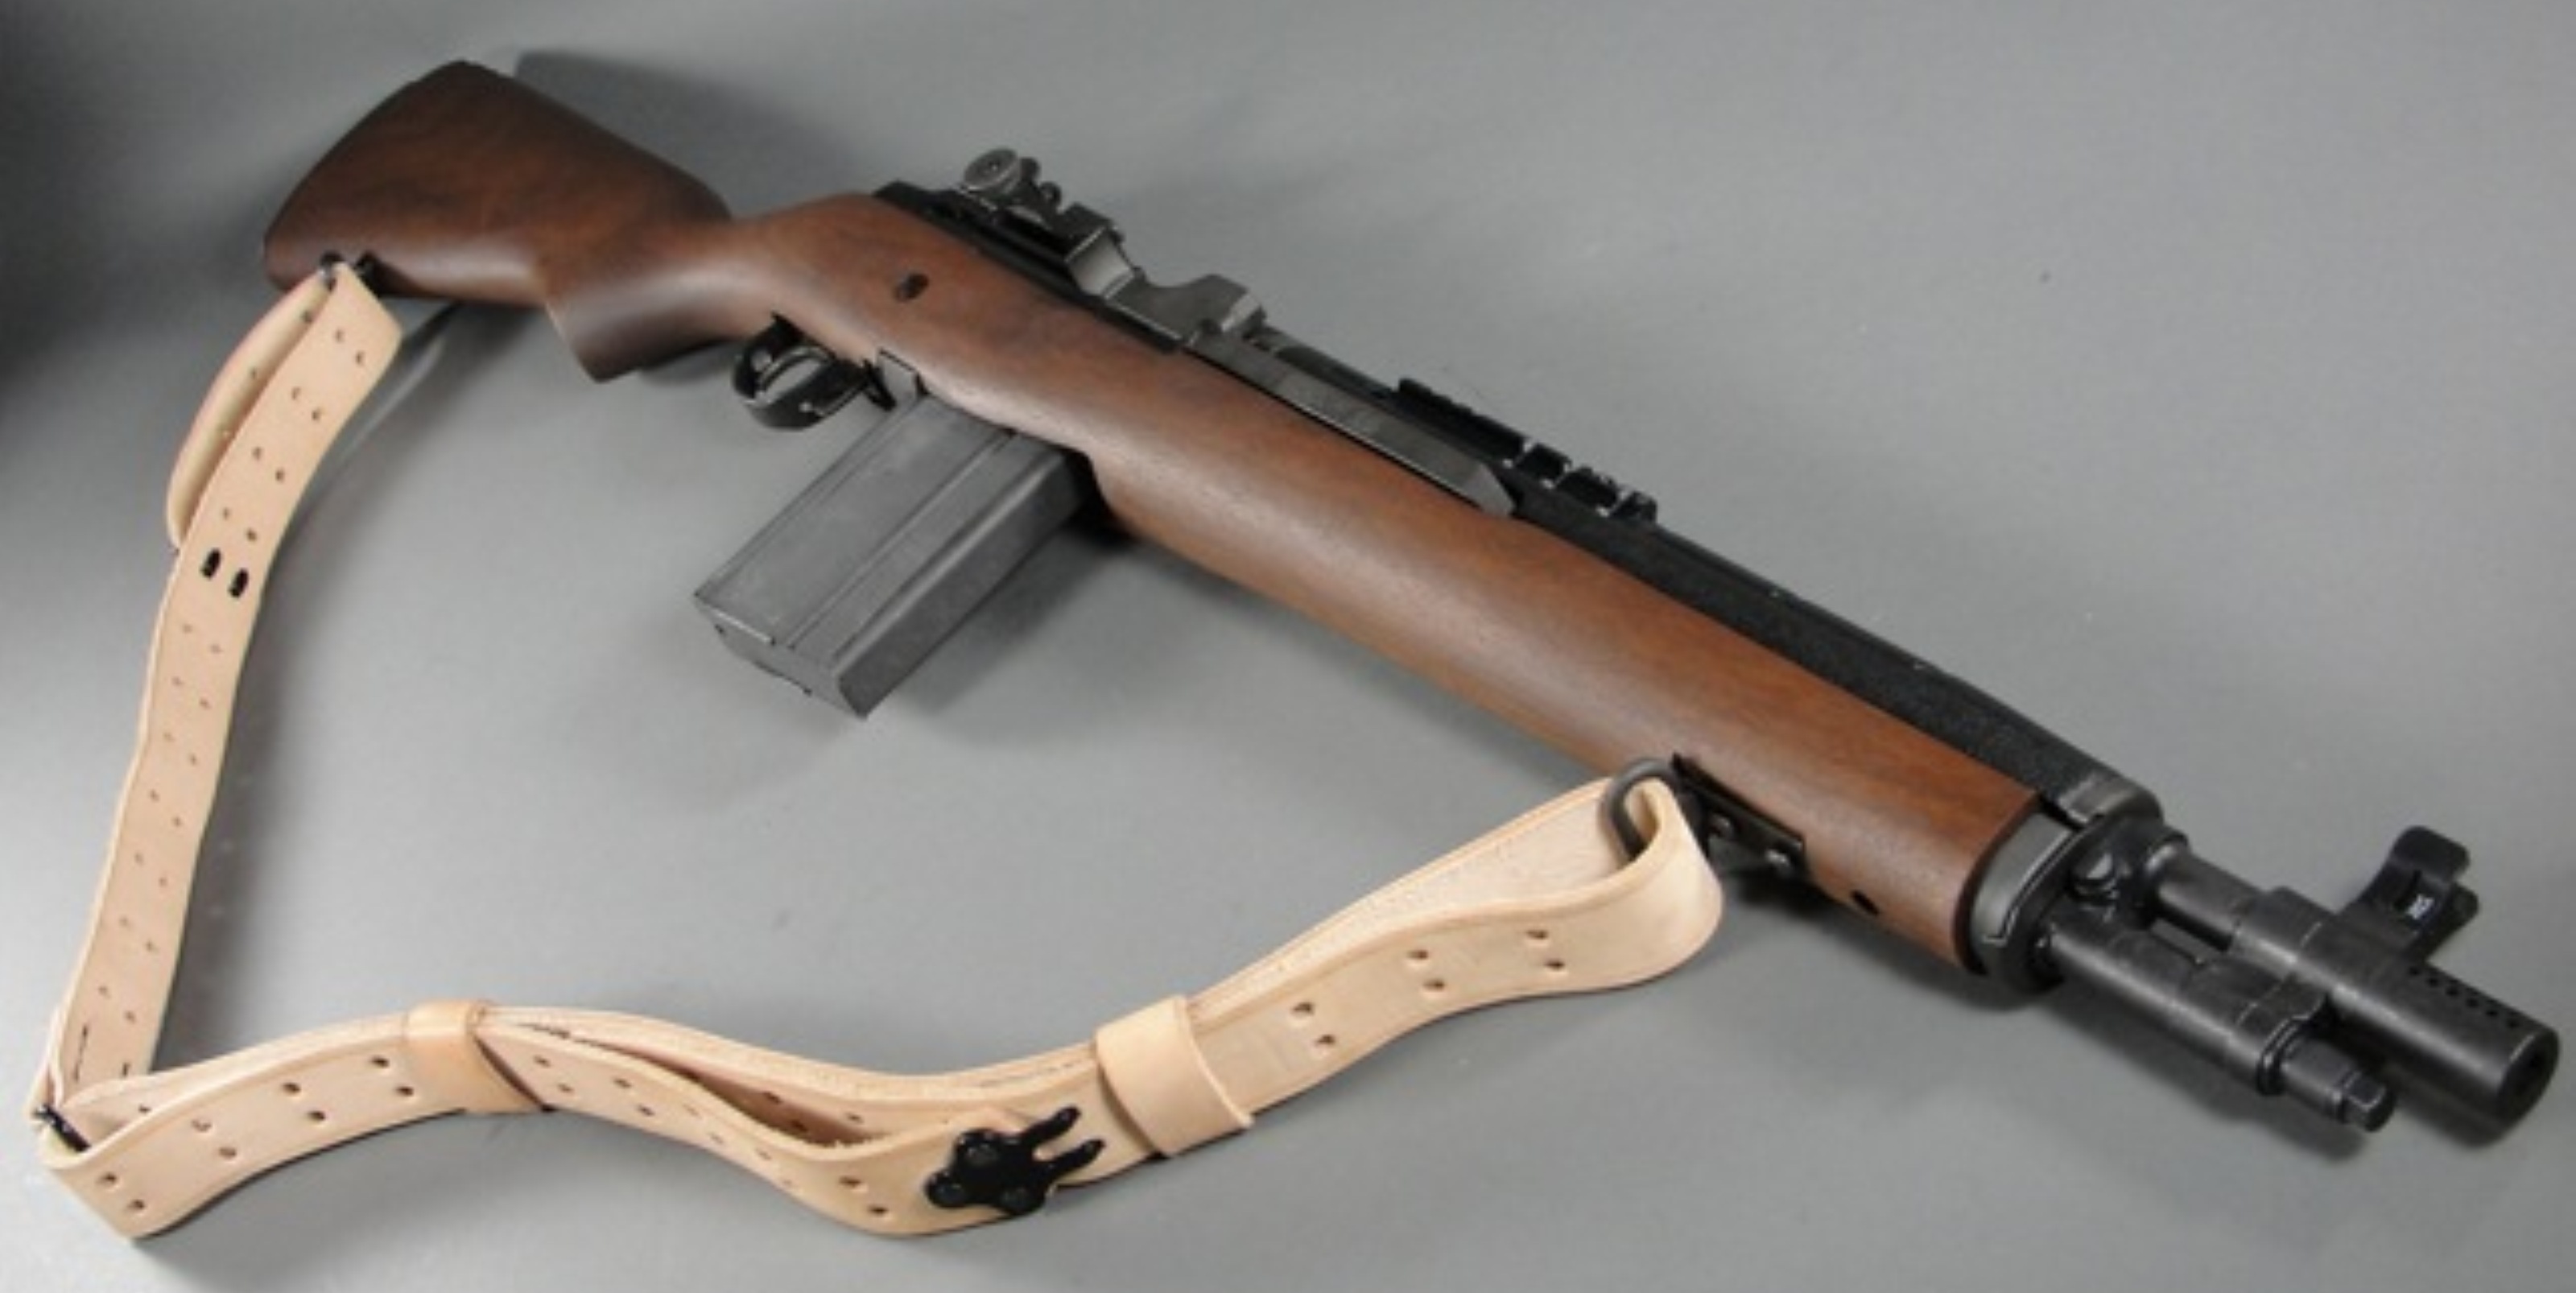 Amazing Springfield Armory M1A SOCOM Pictures & Backgrounds. 